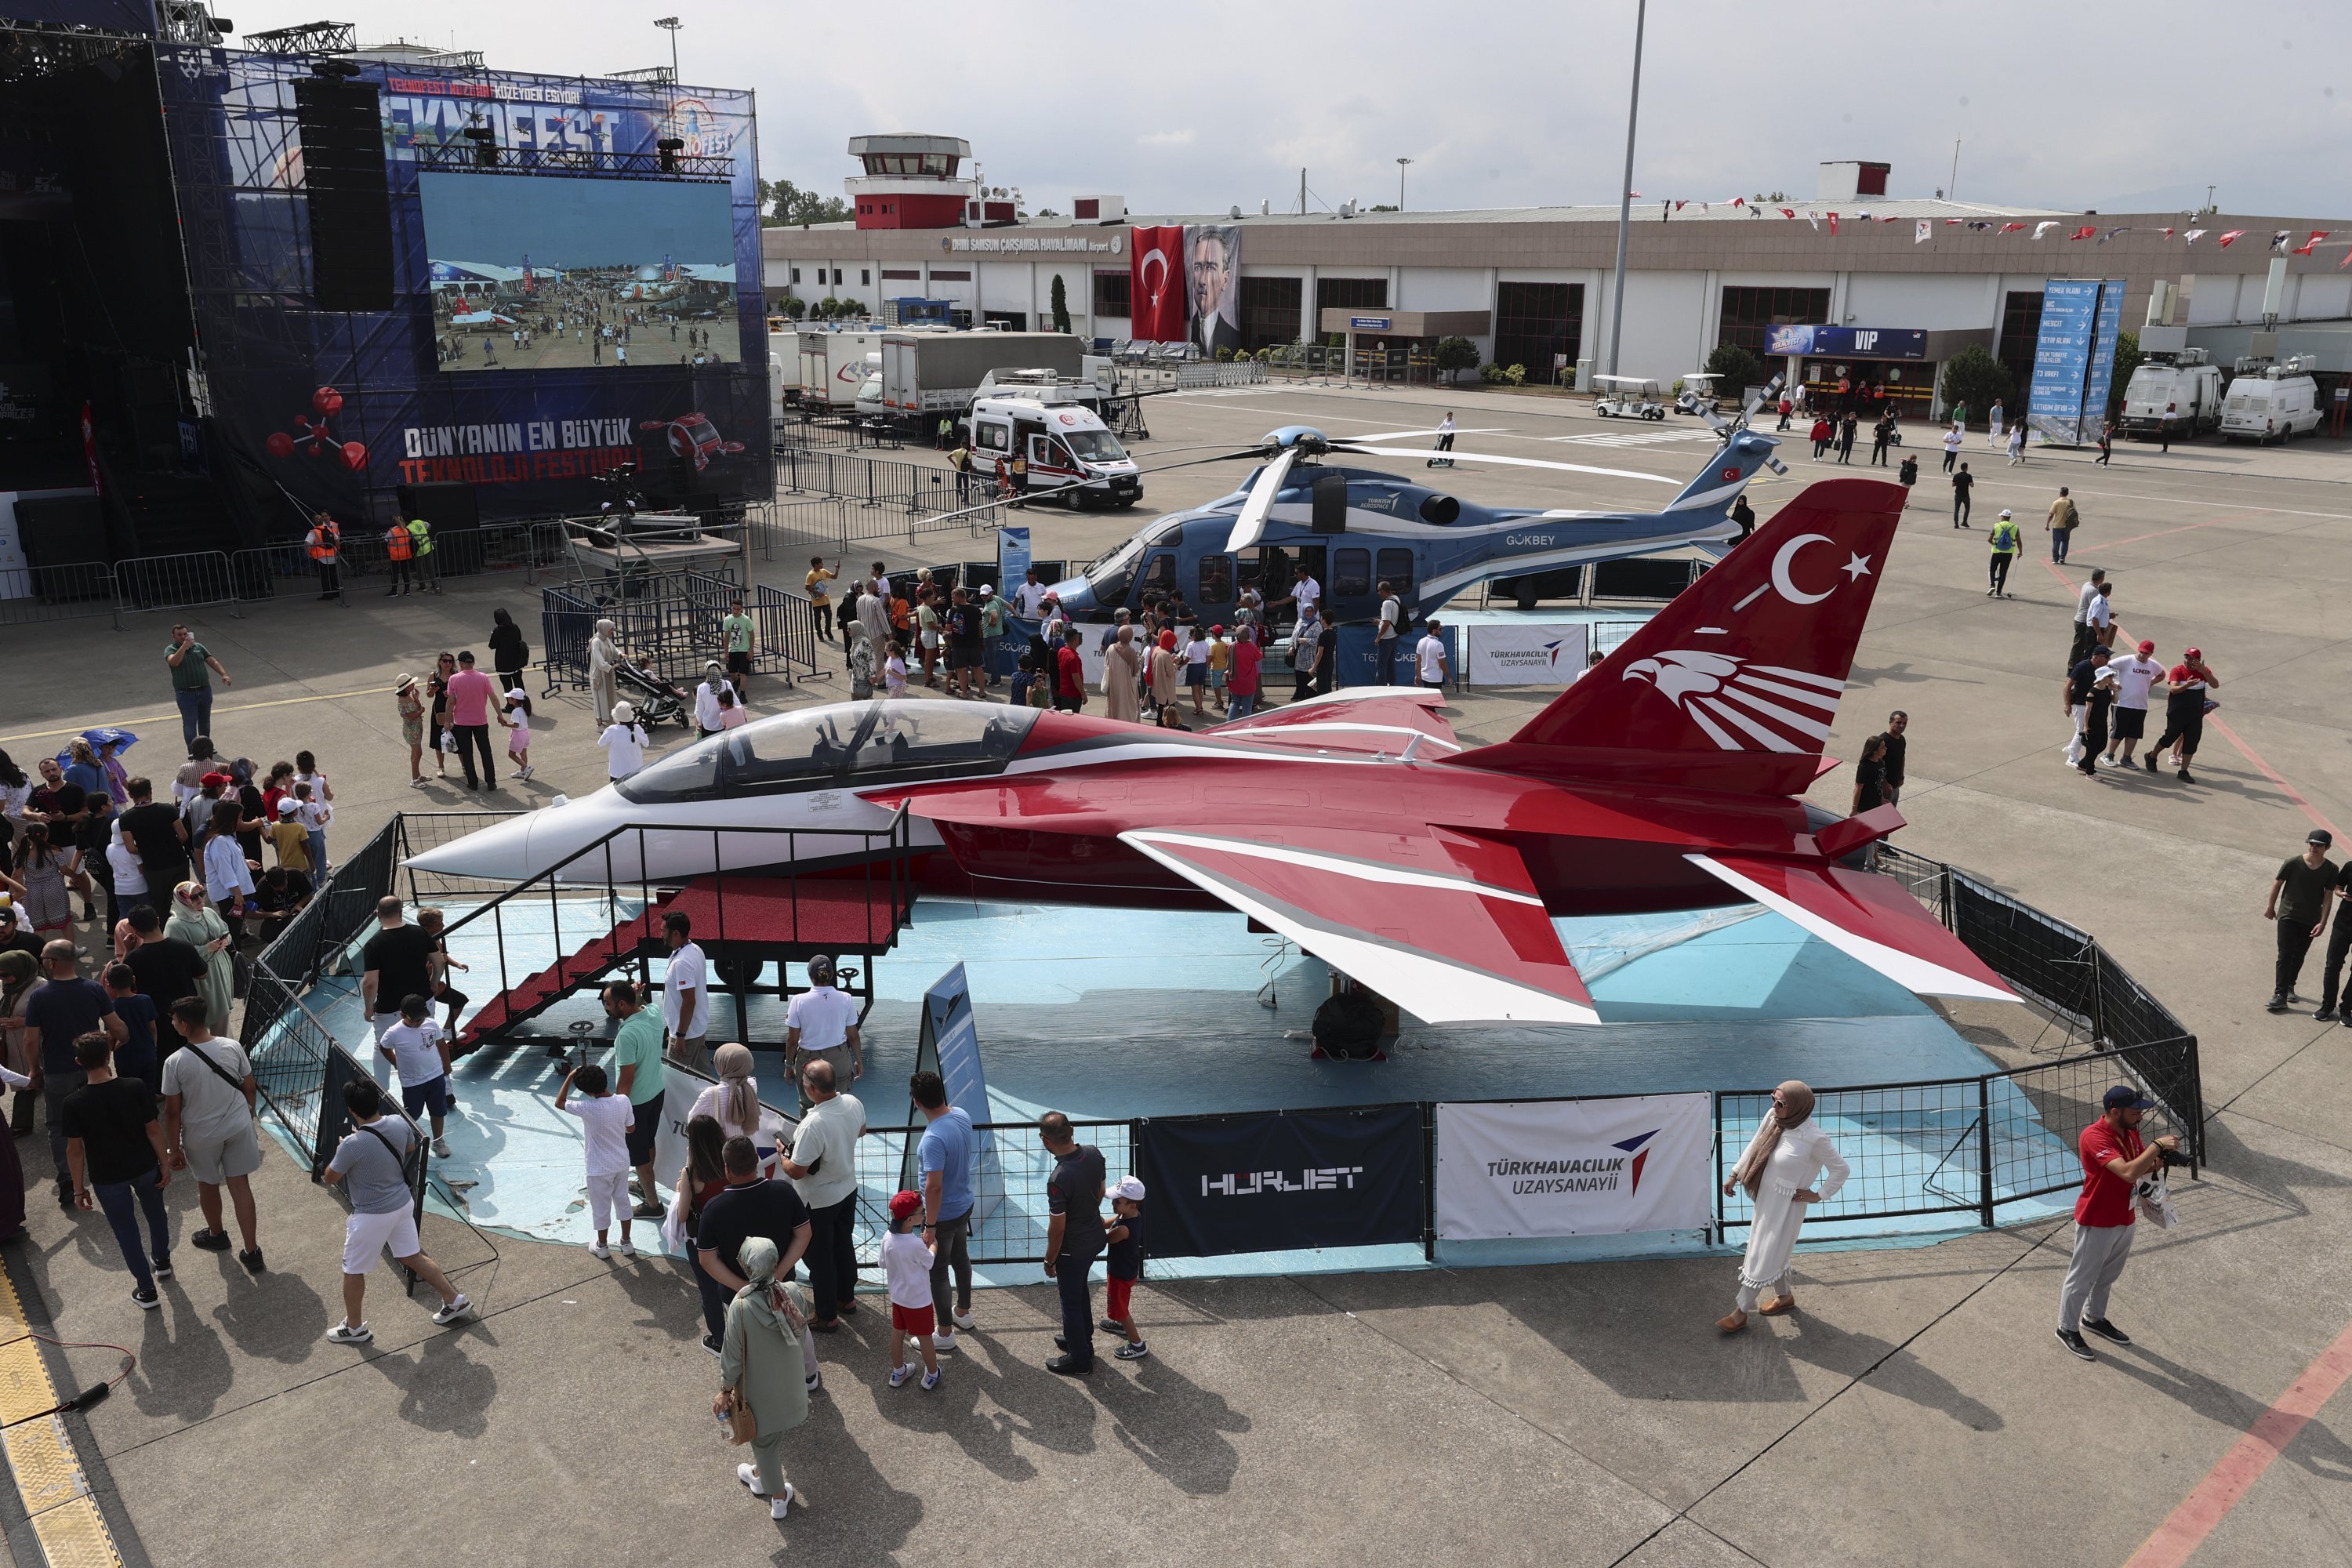 Hürjet, a jet trainer and light attack aircraft, is seen during the Teknofest aerospace and technology festival in Samsun, northern Türkiye, Sept. 1, 2022. (AA Photo)